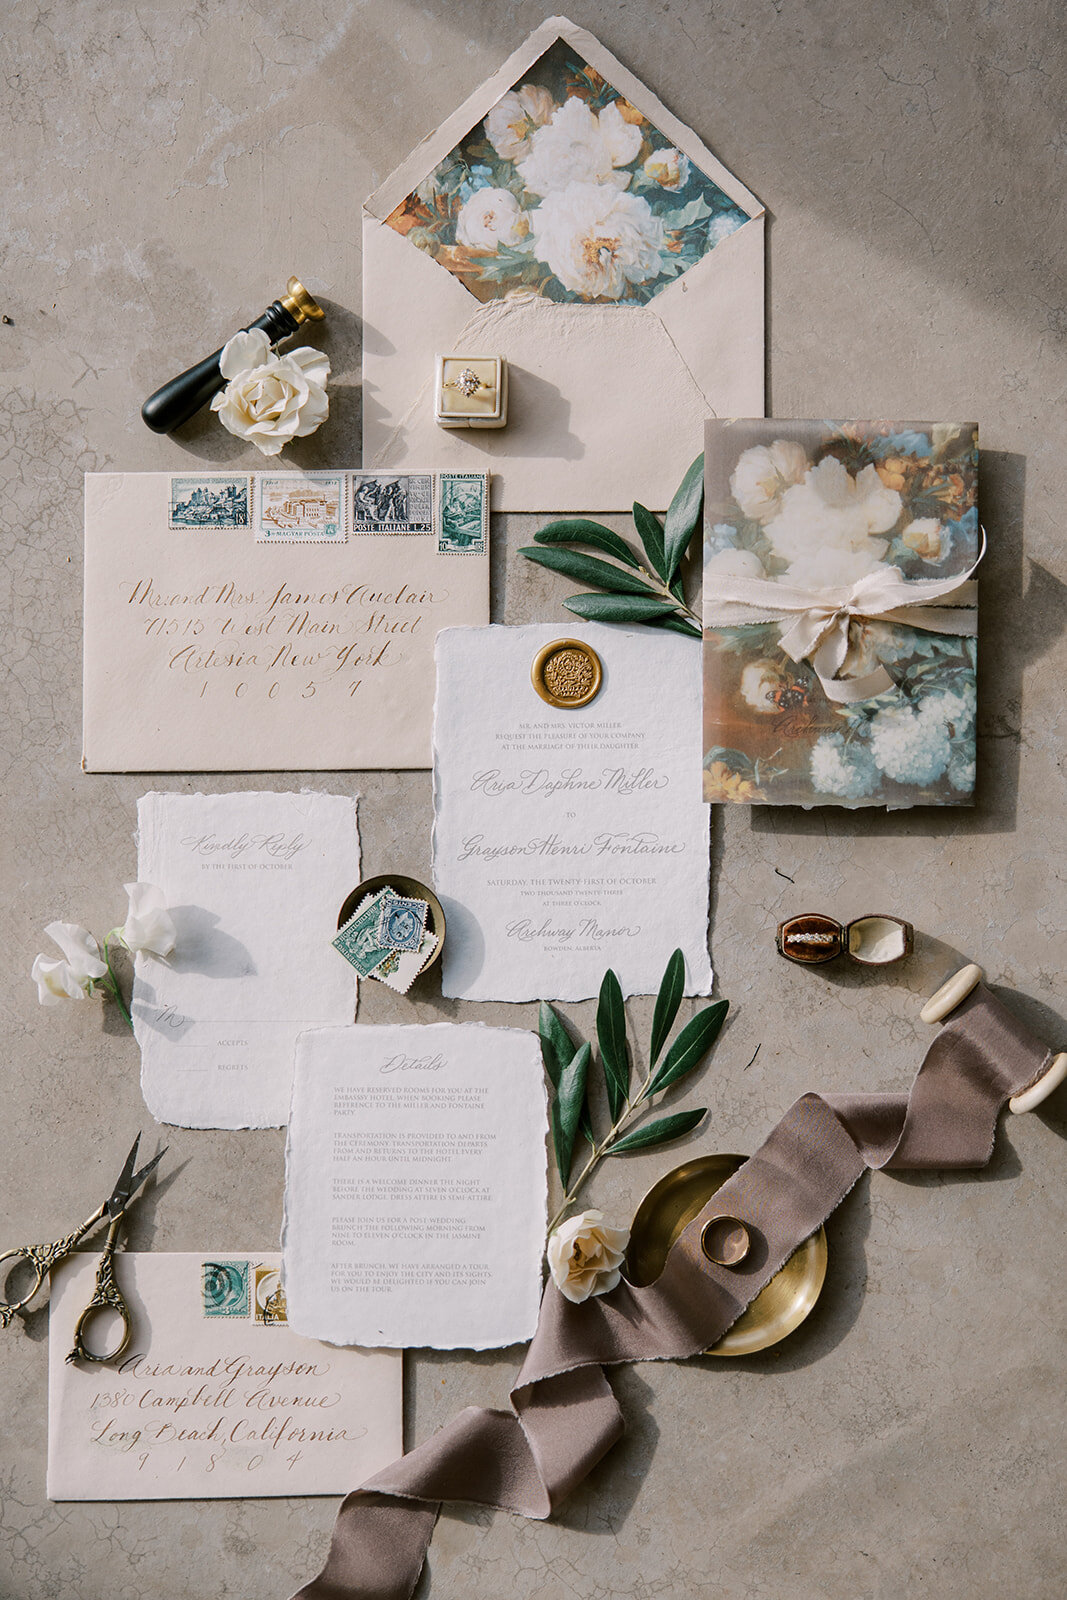 Invitation set and other details at Archway Manor